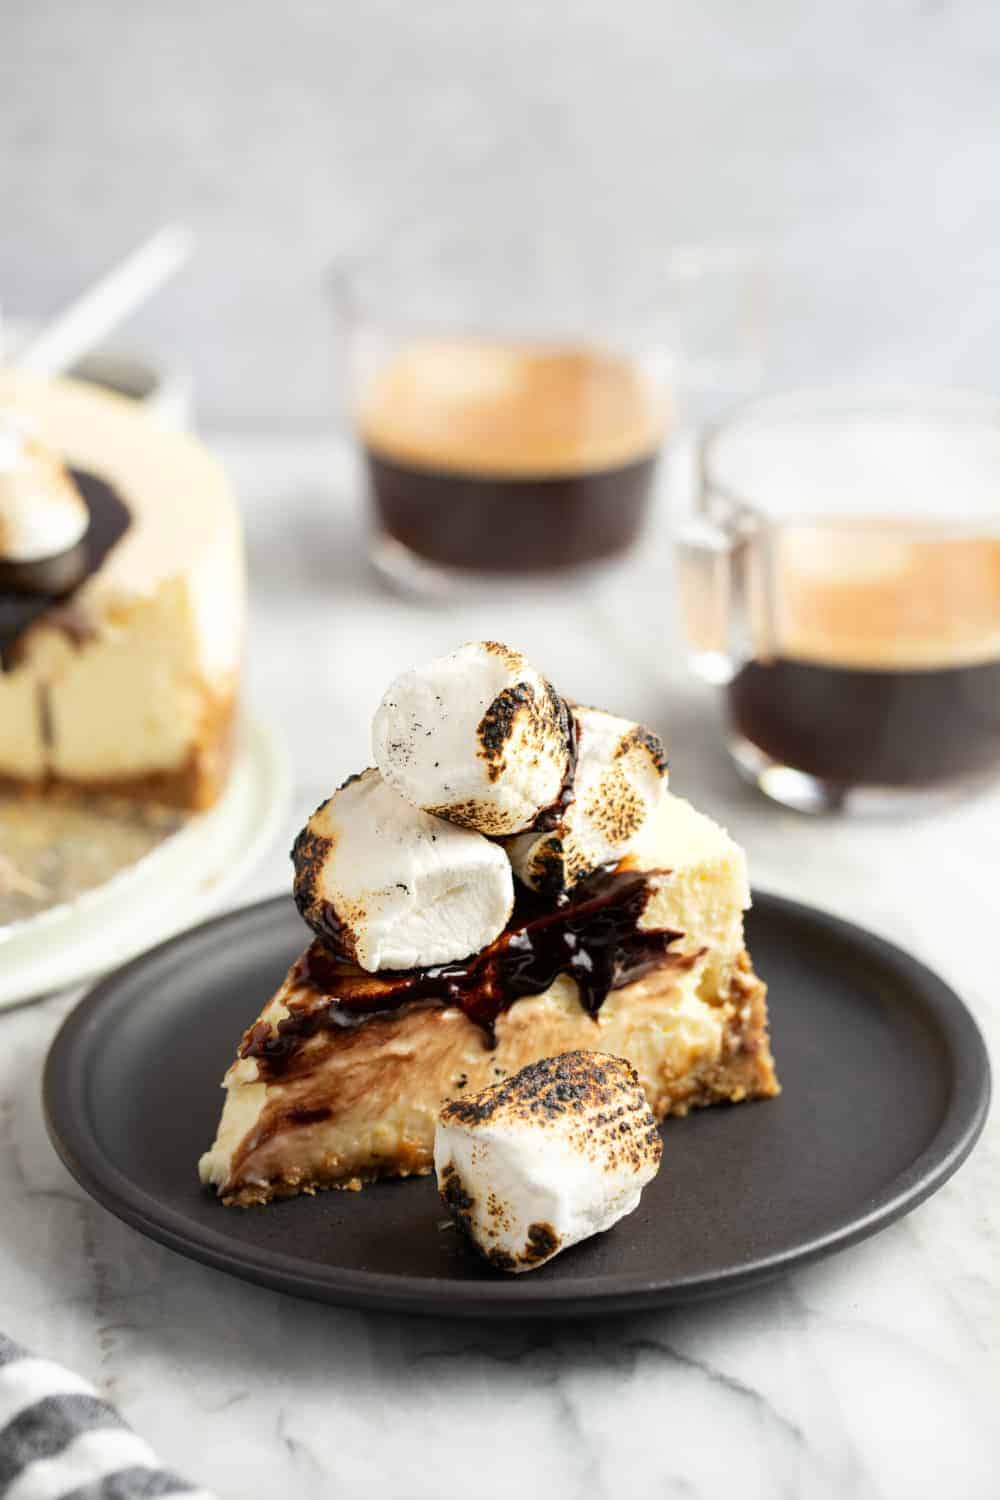 Slice of s'mores cheesecake on a plate in front of cups of espresso